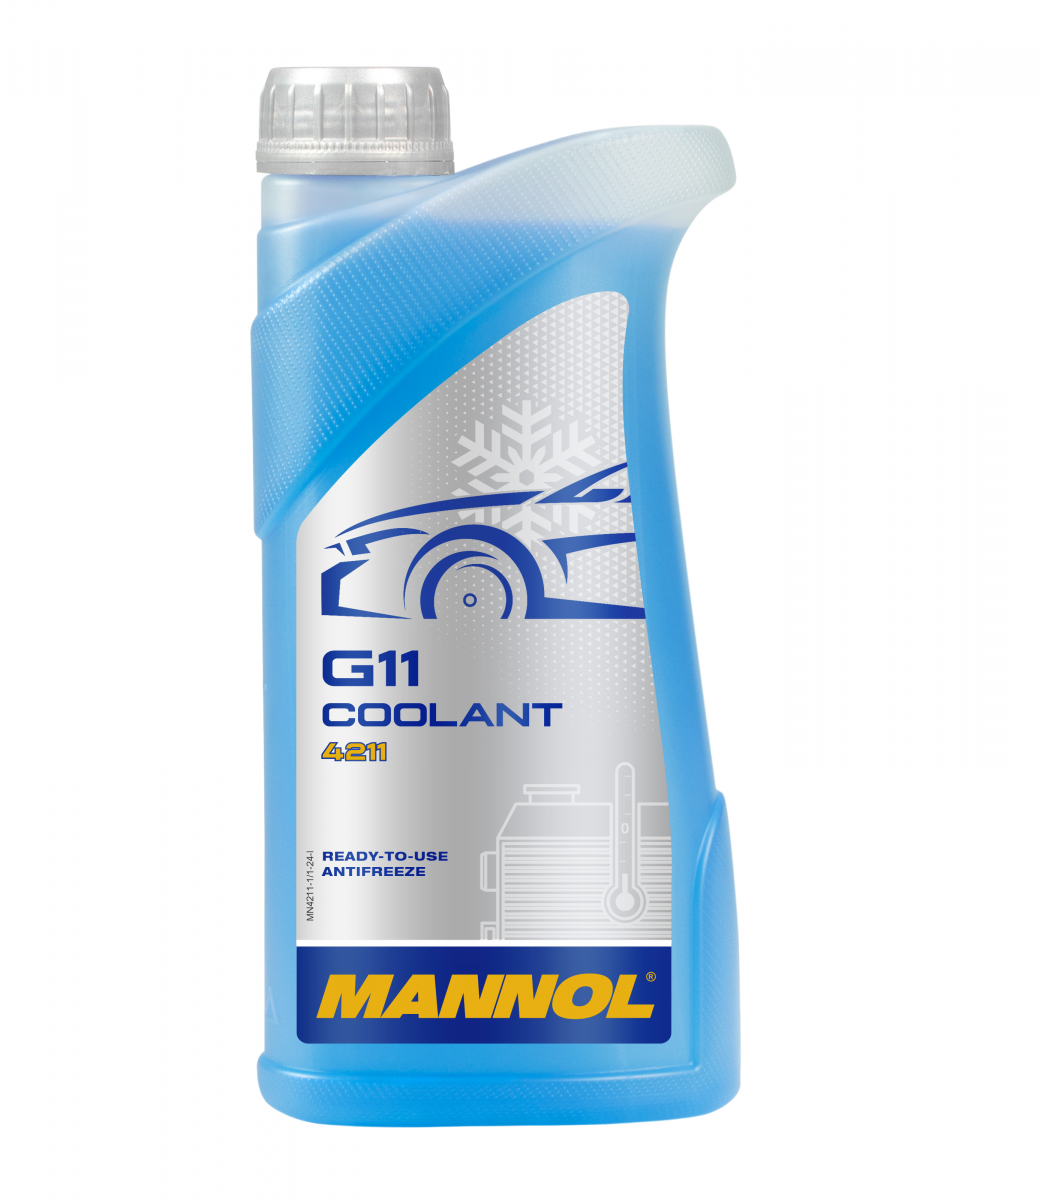 https://www.mannol.de/file/repository/products/gallery/pictures_png_MN4211-1_white_blue_front_1200.png